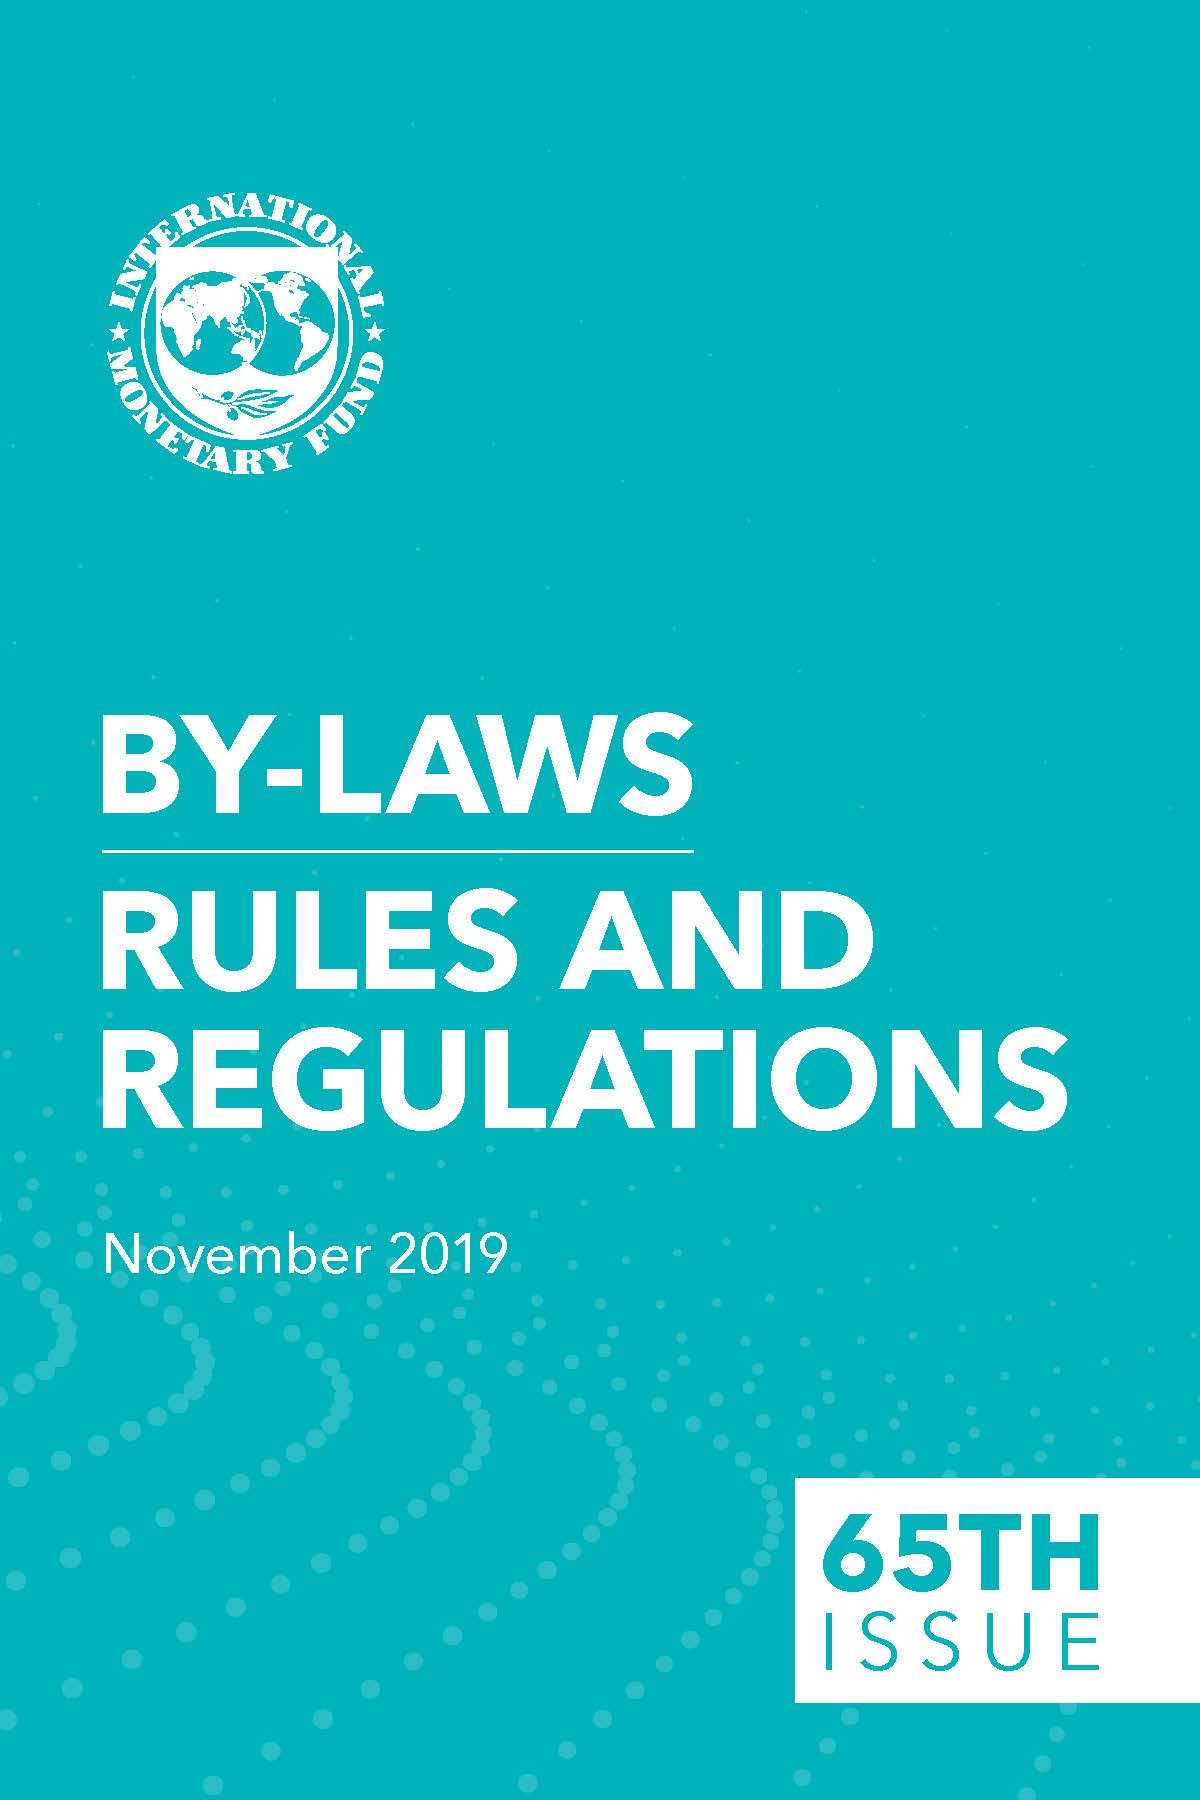 By-Laws Rules and Regulations of the International Monetary FundSixty-Third Issue Cover-By-Laws